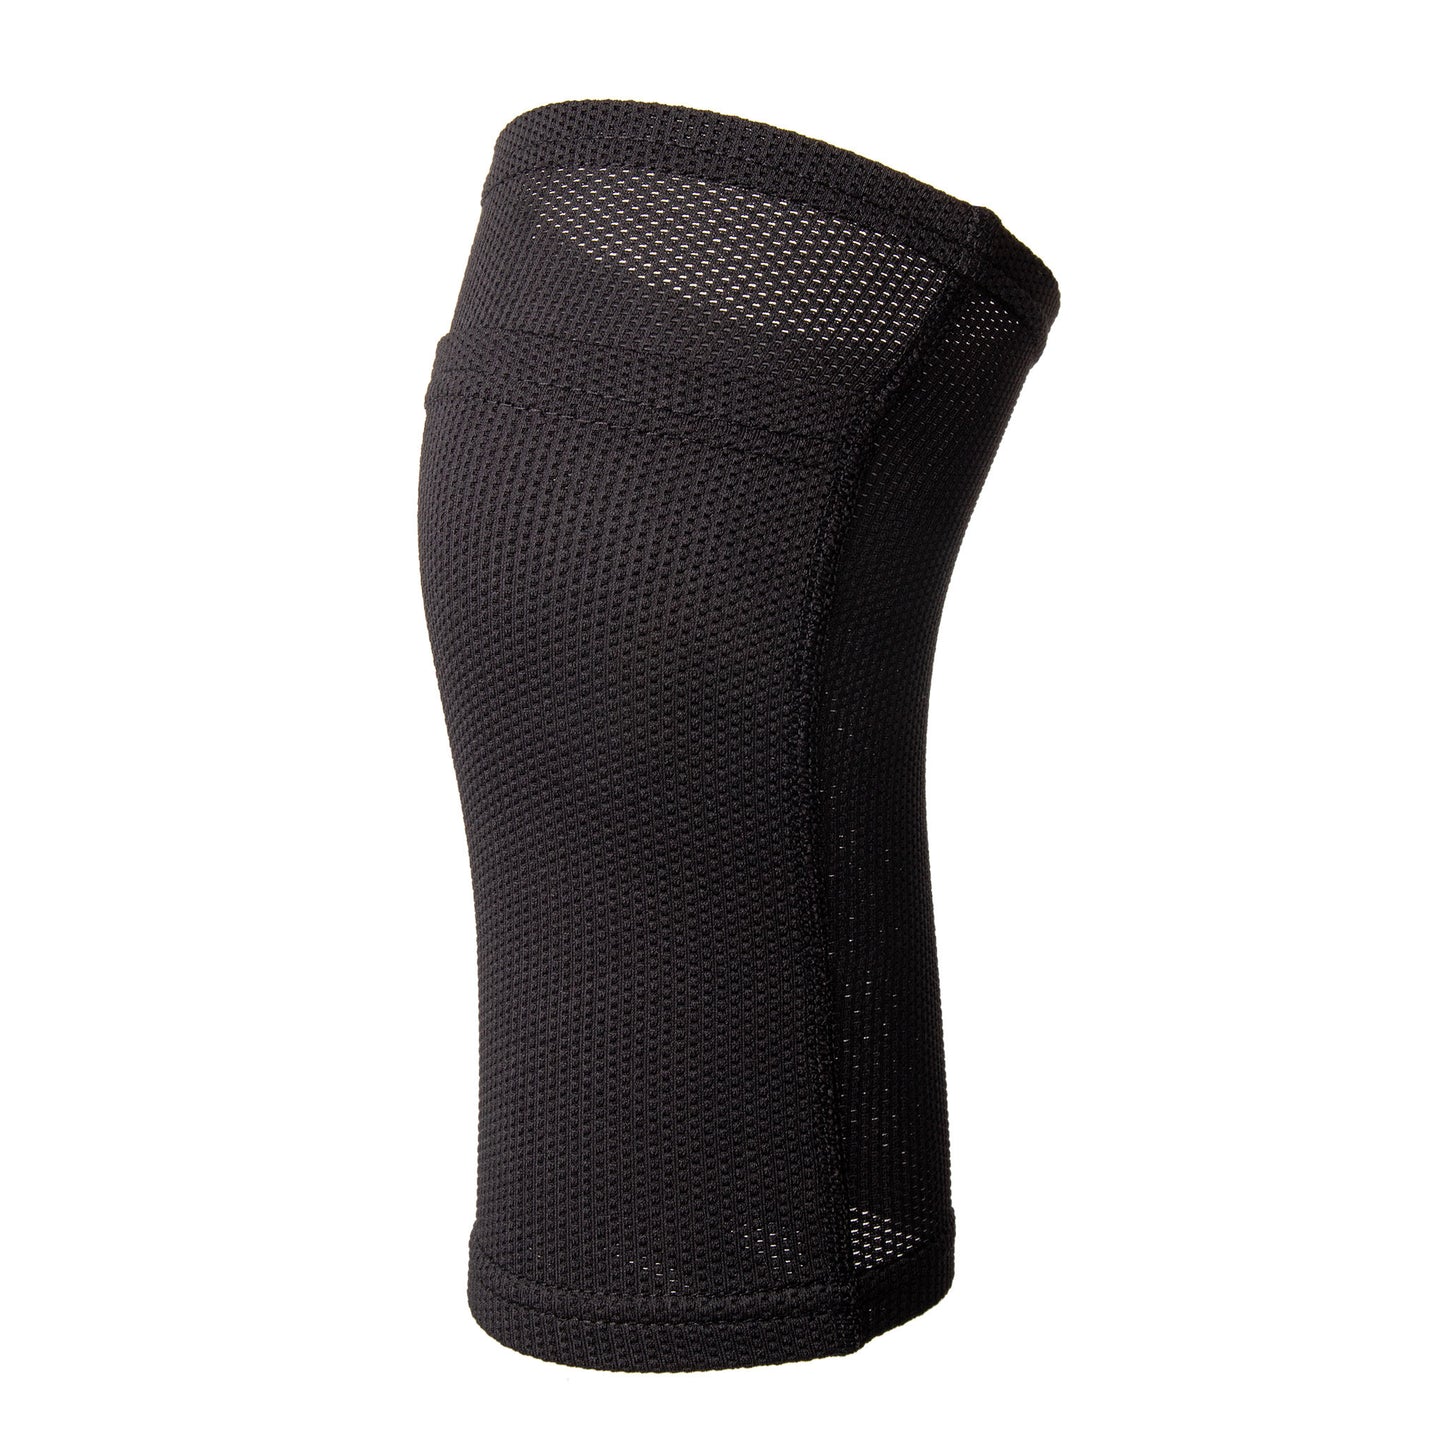 NOVAYAD Knee Guards For Athletic Use Knee Compression Sleeve for Women and Men